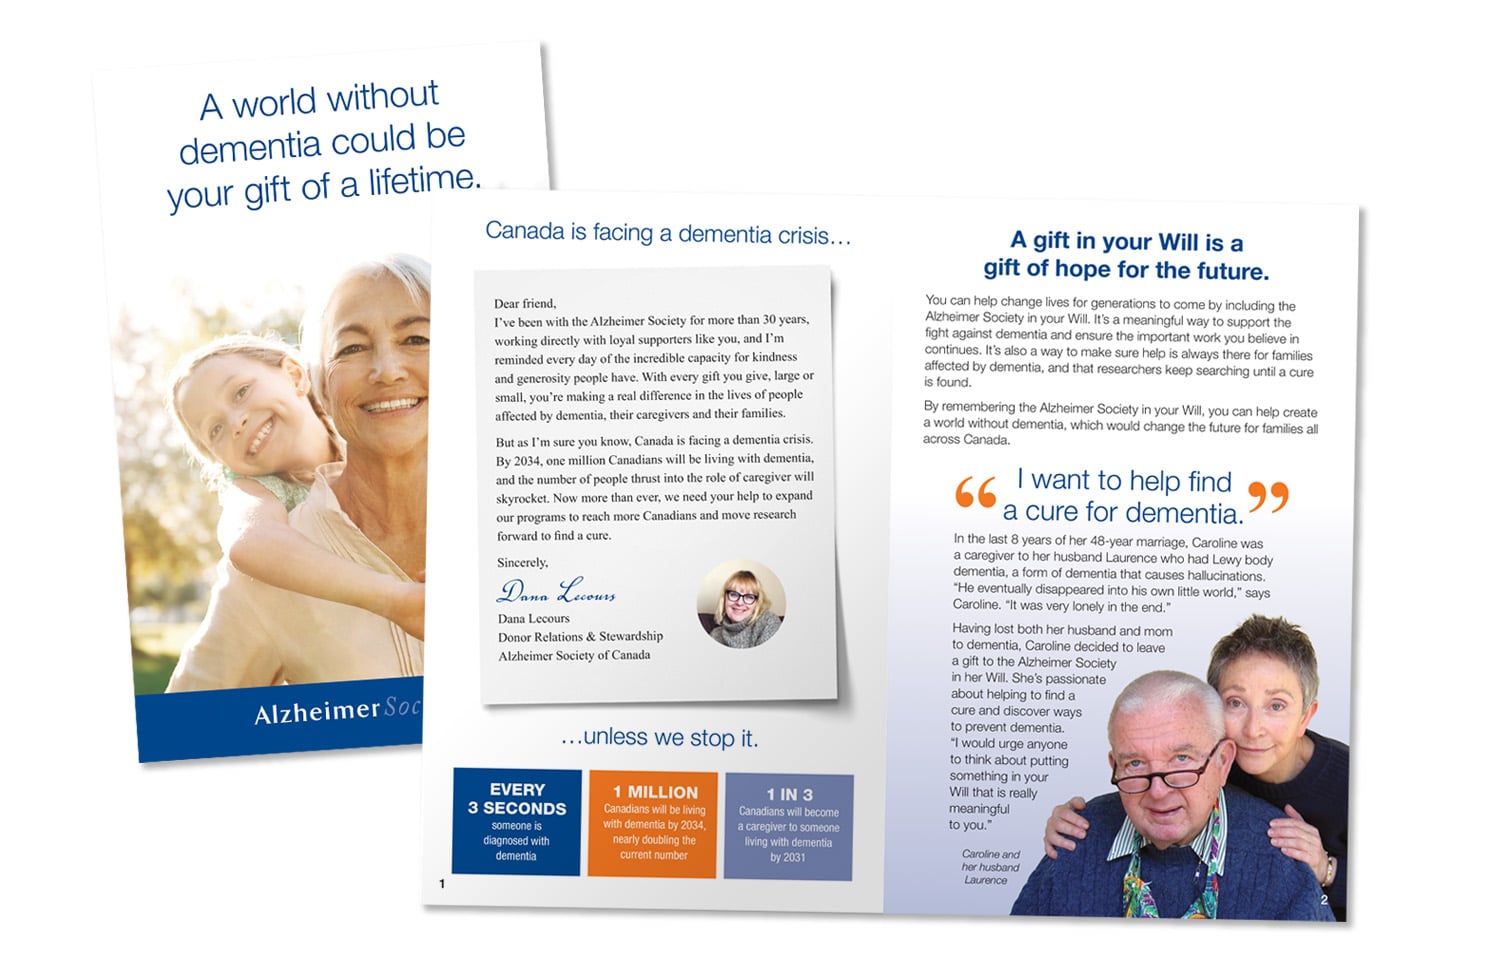 Alzheimer Society of Canada direct mail